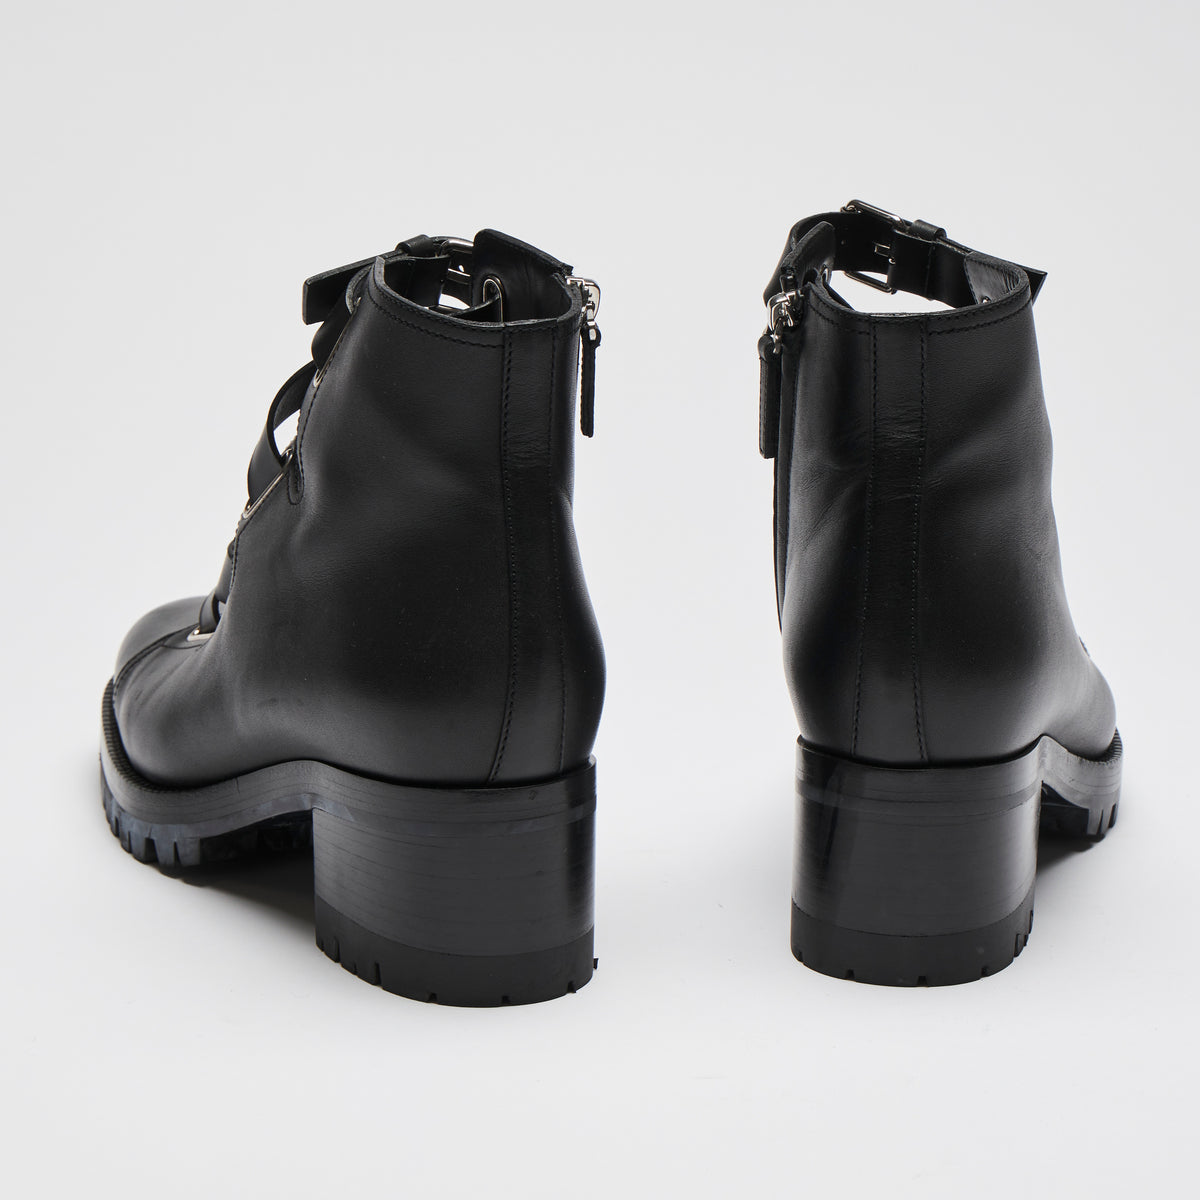 Excellent Pre-Loved Black Leather Lace Up Ankle Boots with Silver Tone Hardware and Inside Zip.(back)